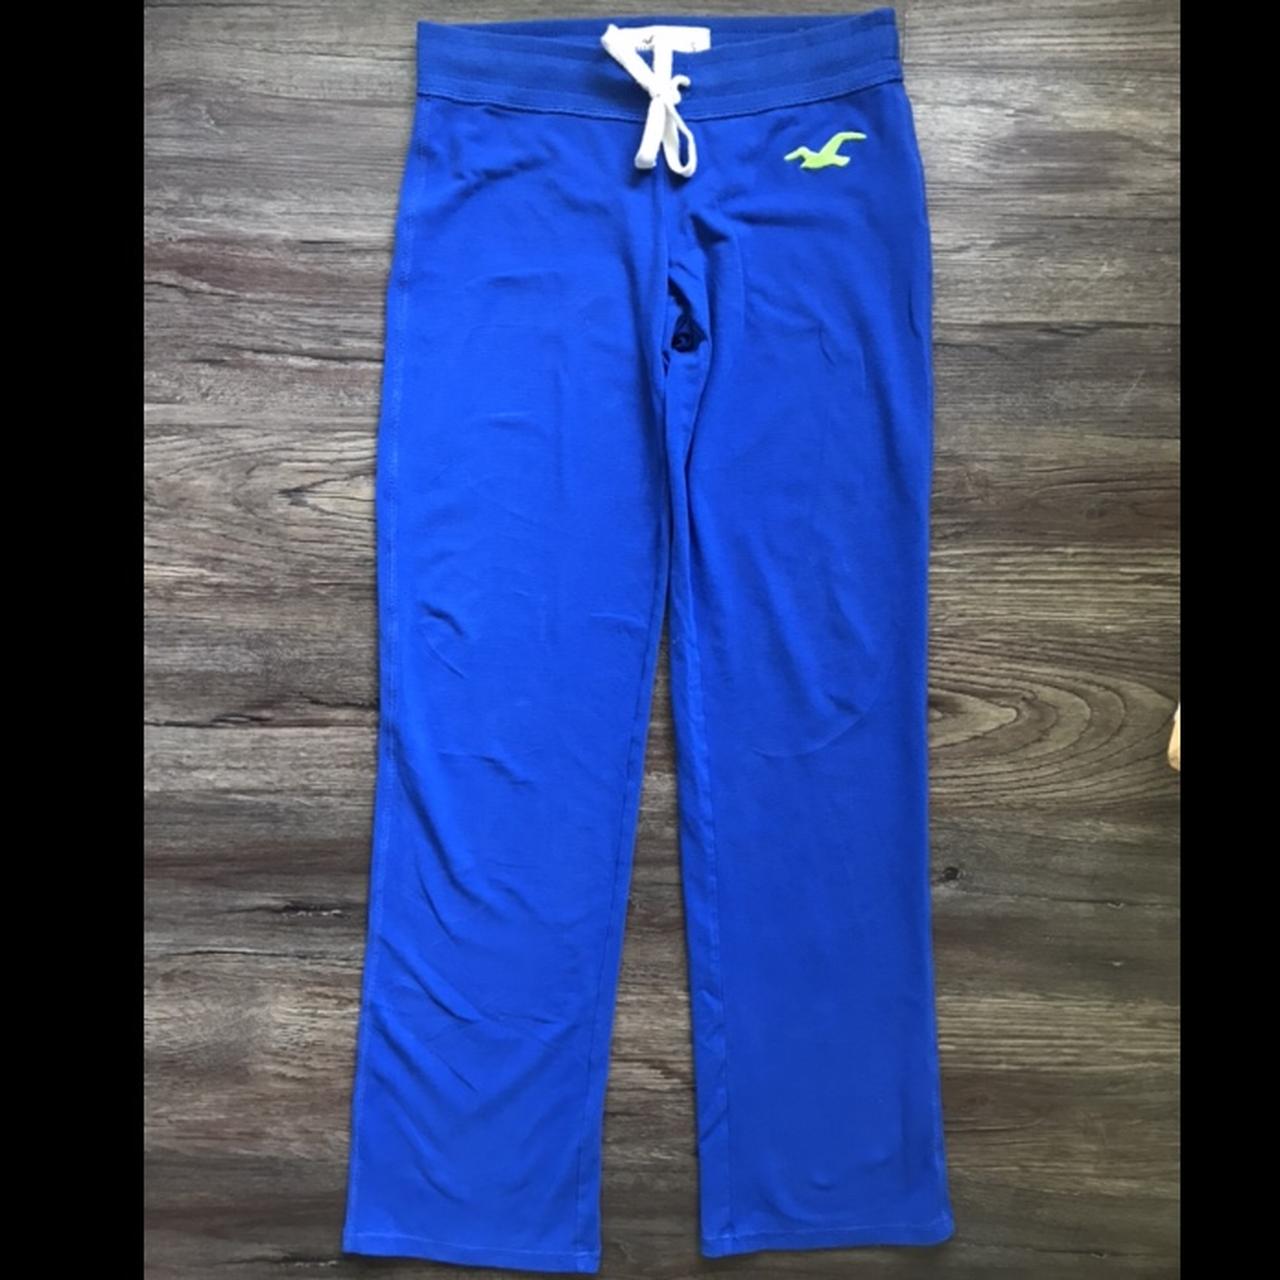 Hollister Sweatpants Blue Size XS - $10 (77% Off Retail) - From Liliana